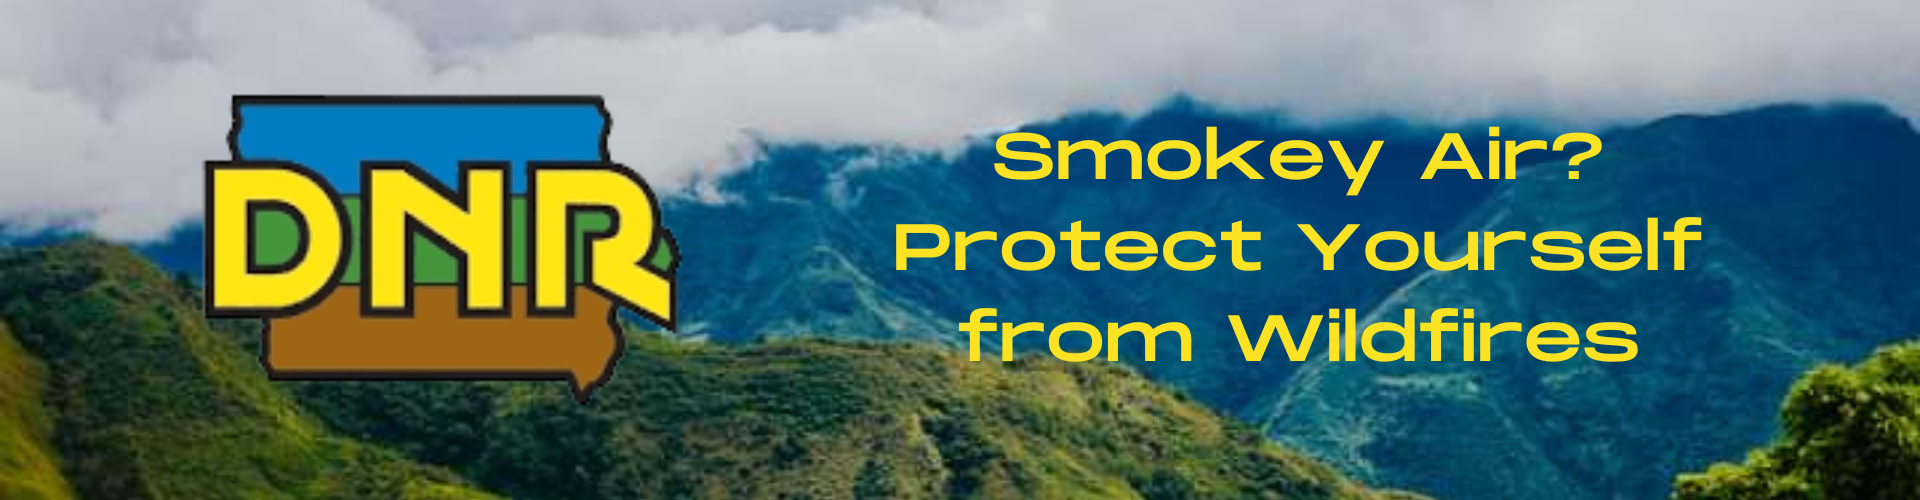 Smokey Air? Protect Yourself from Wildfires